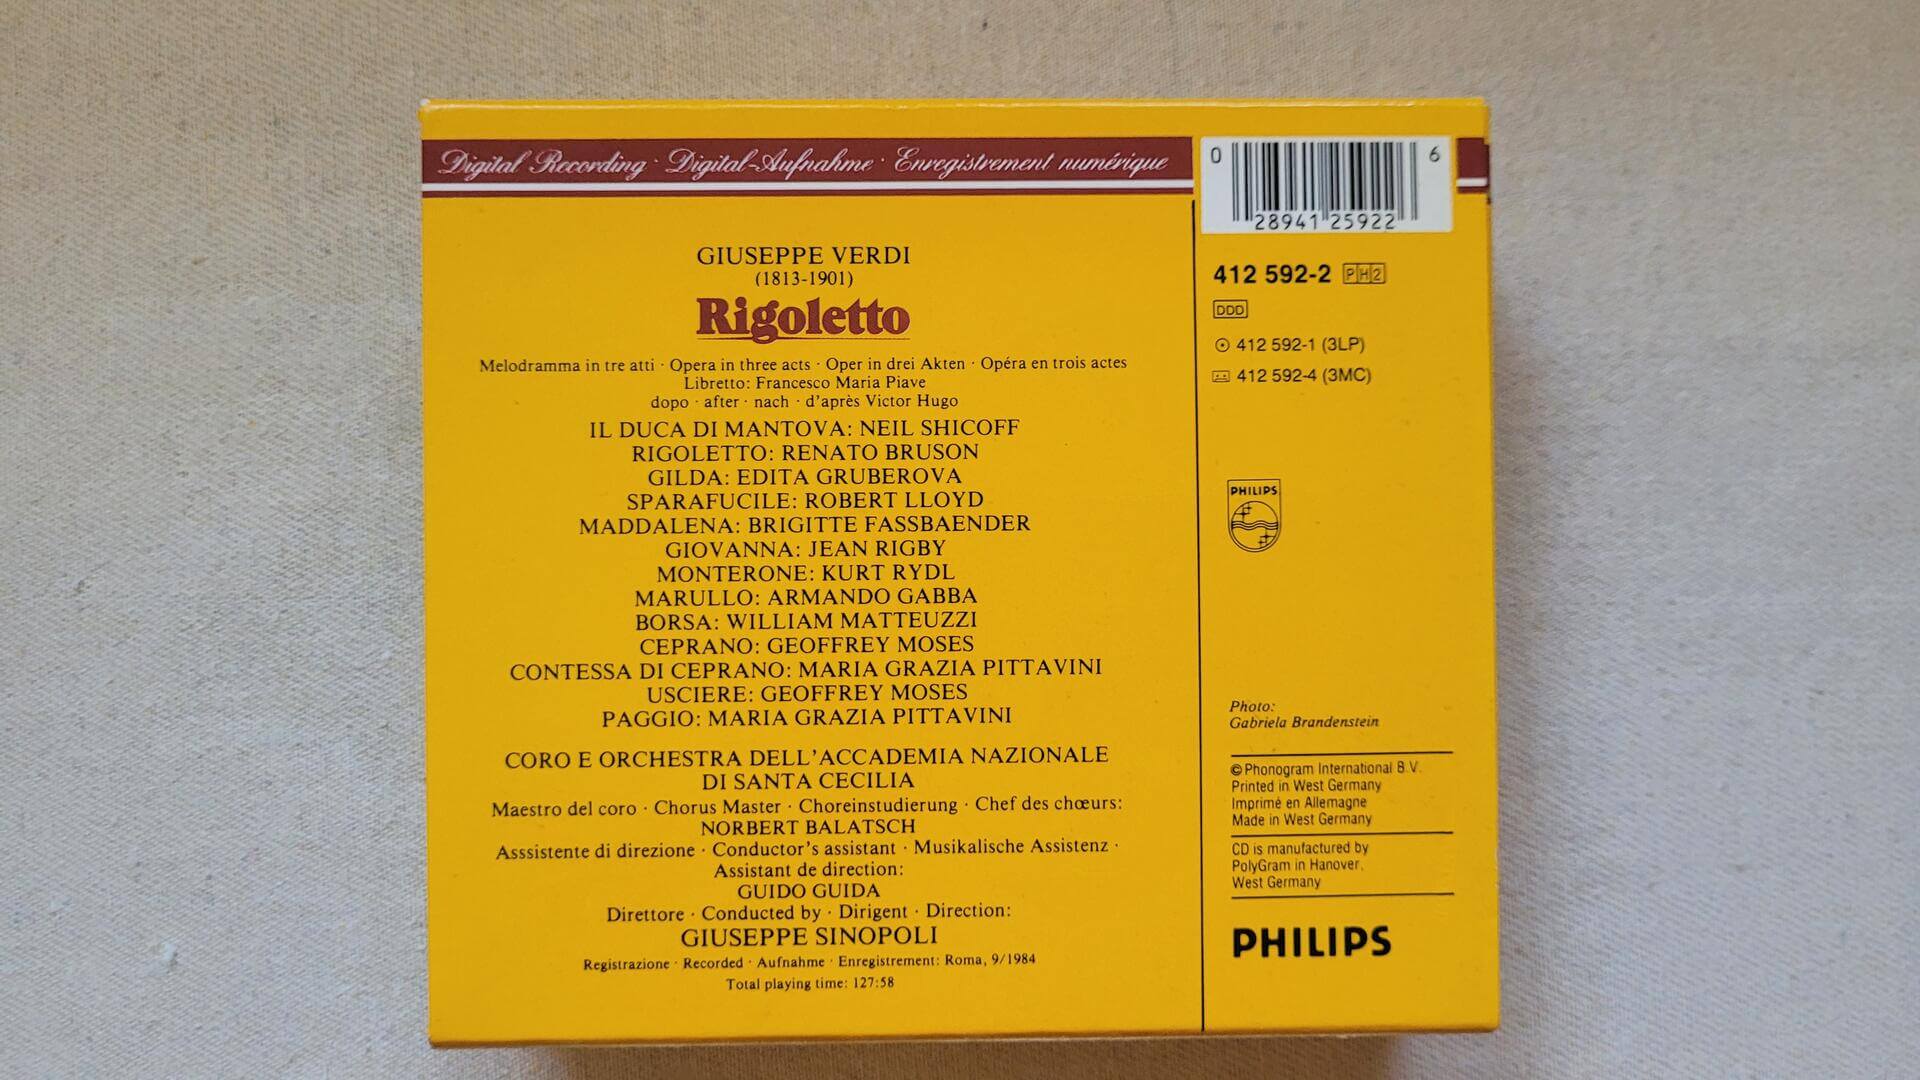 Philips Digital Classics Verdi Rigoletto 2CD Box Set Giuseppe Sinopoli - vintage collectible classical music cd set made in West Germany